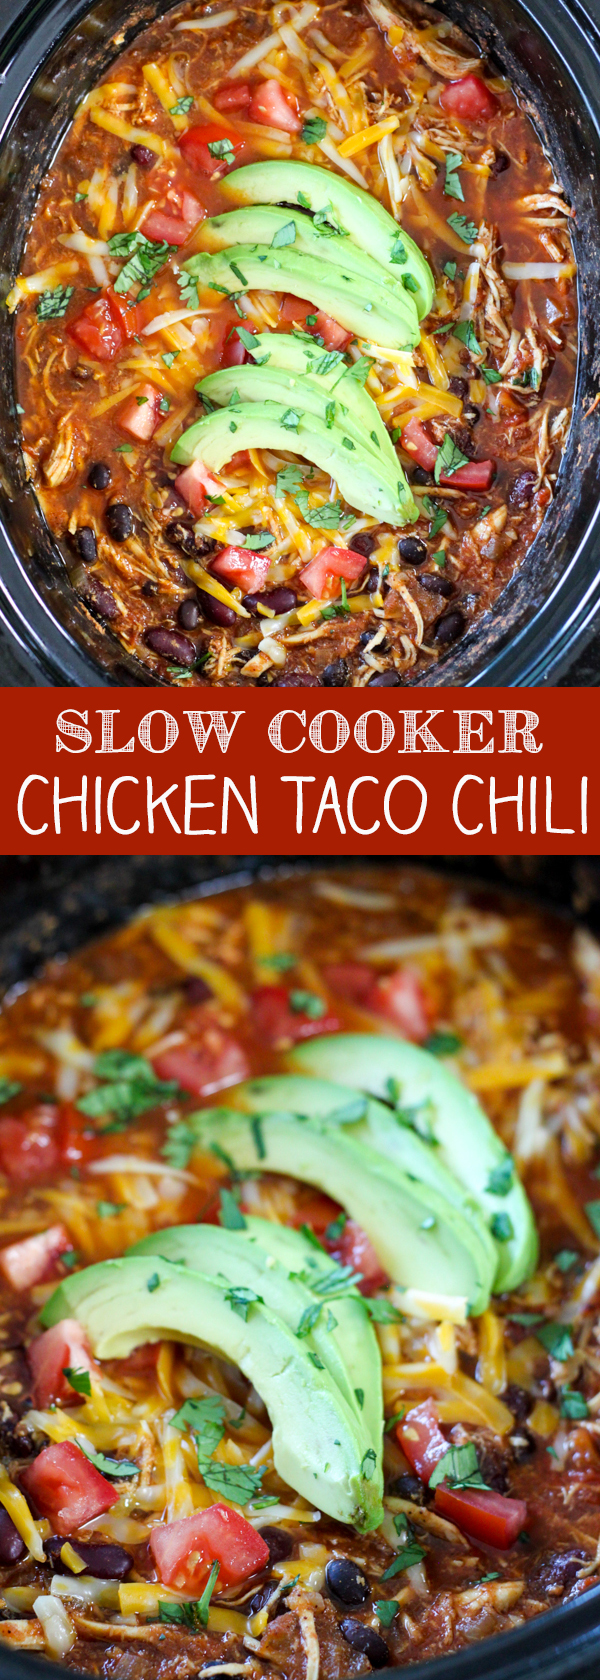 Slow Cooker Chicken Taco Chili